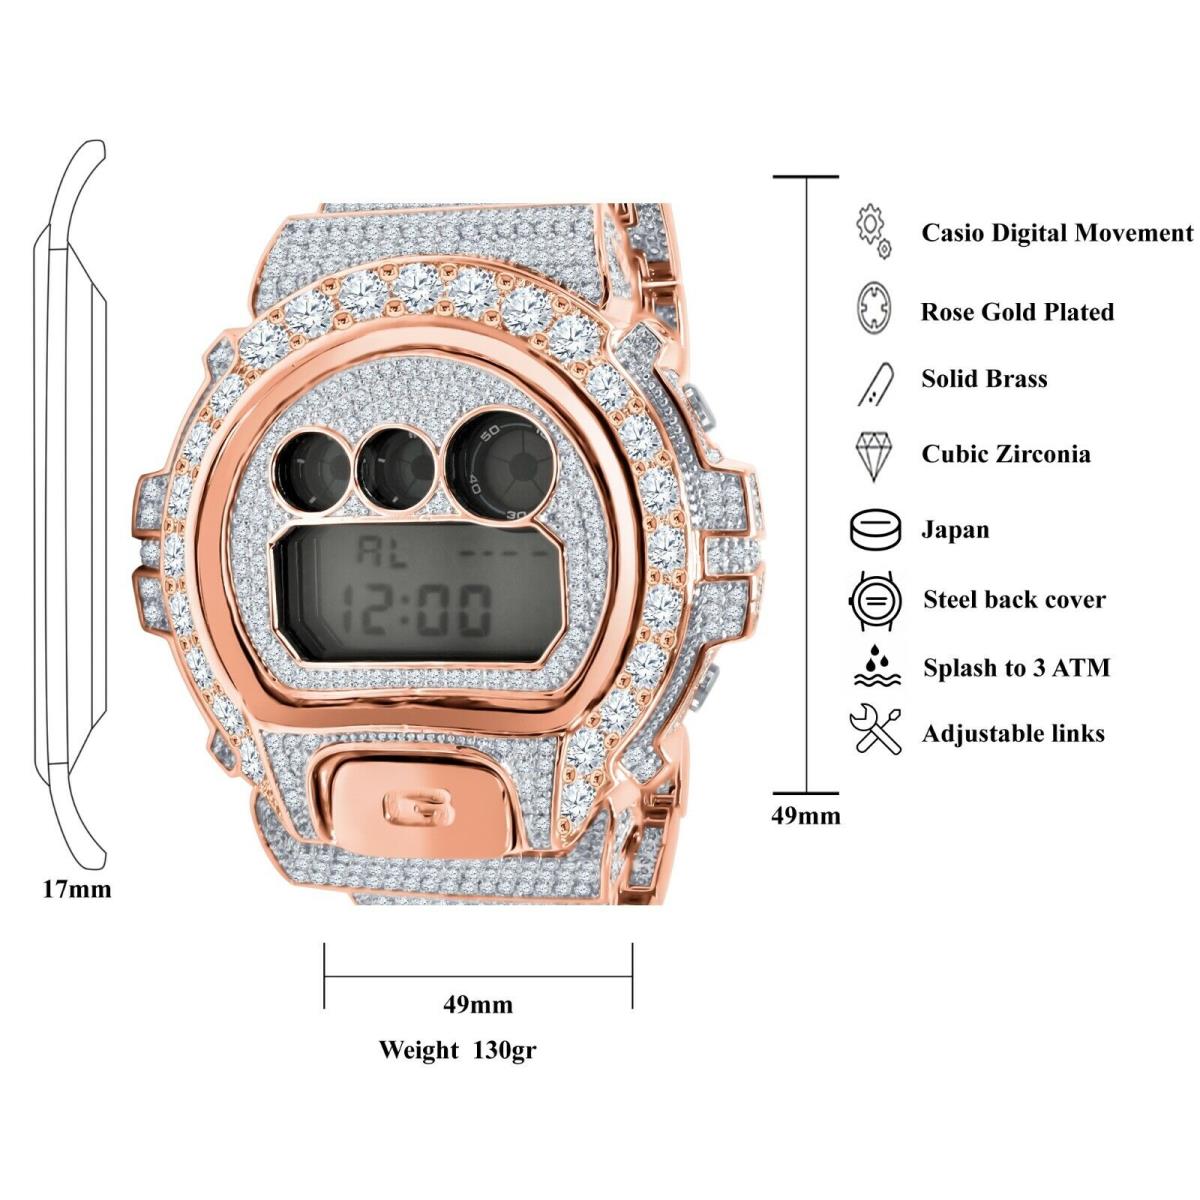 Icy White Solitaire CZ On Rose Gold Finish Casio G-shock DW-6900 Watch